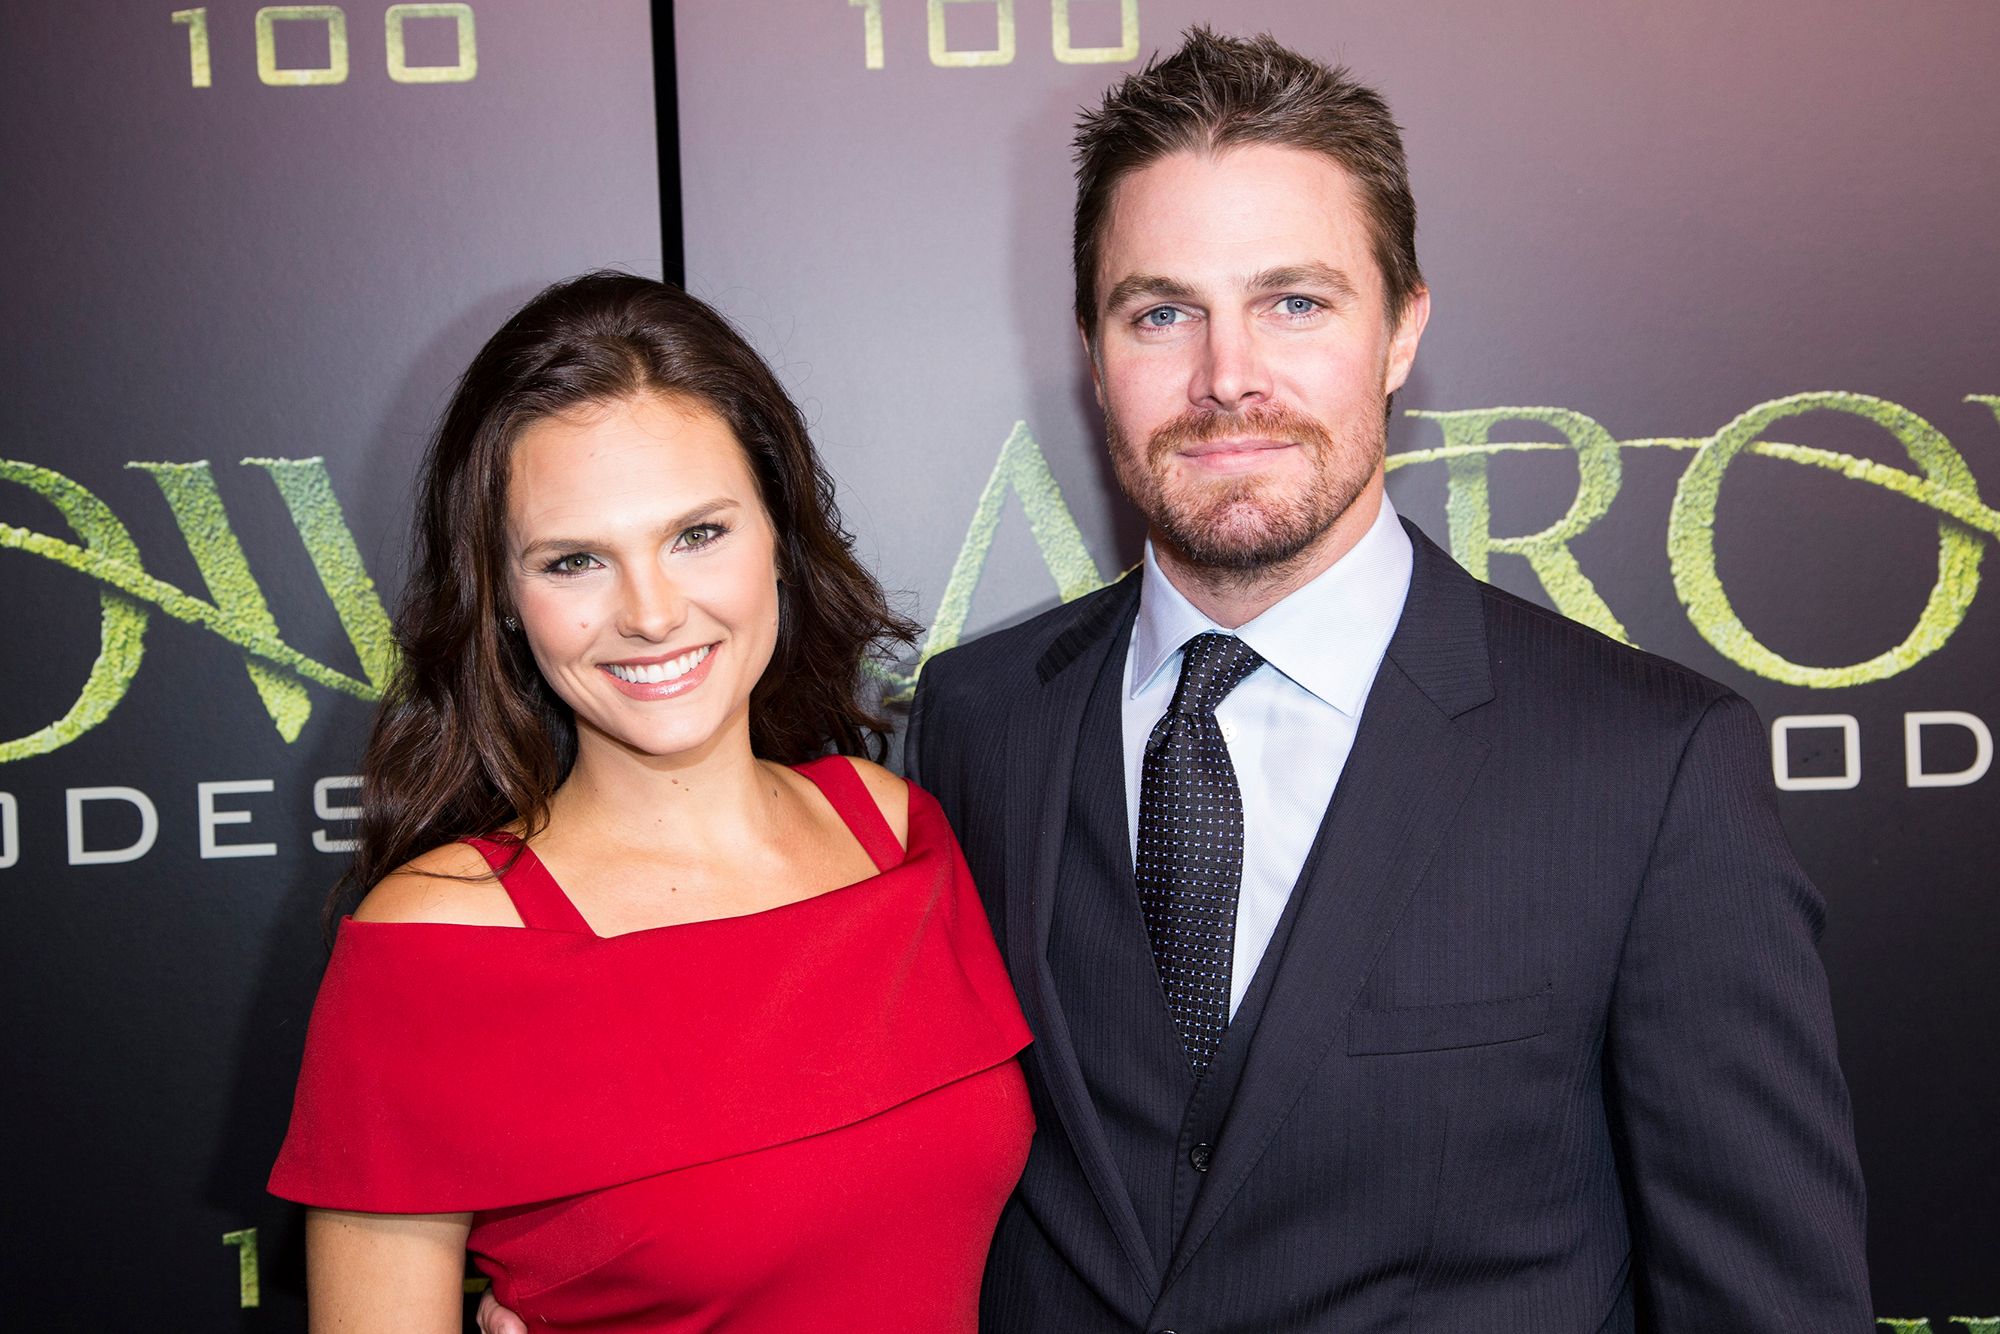 Stephen Amell Admits His Alcohol Habits are Reason for his Fight Outburst